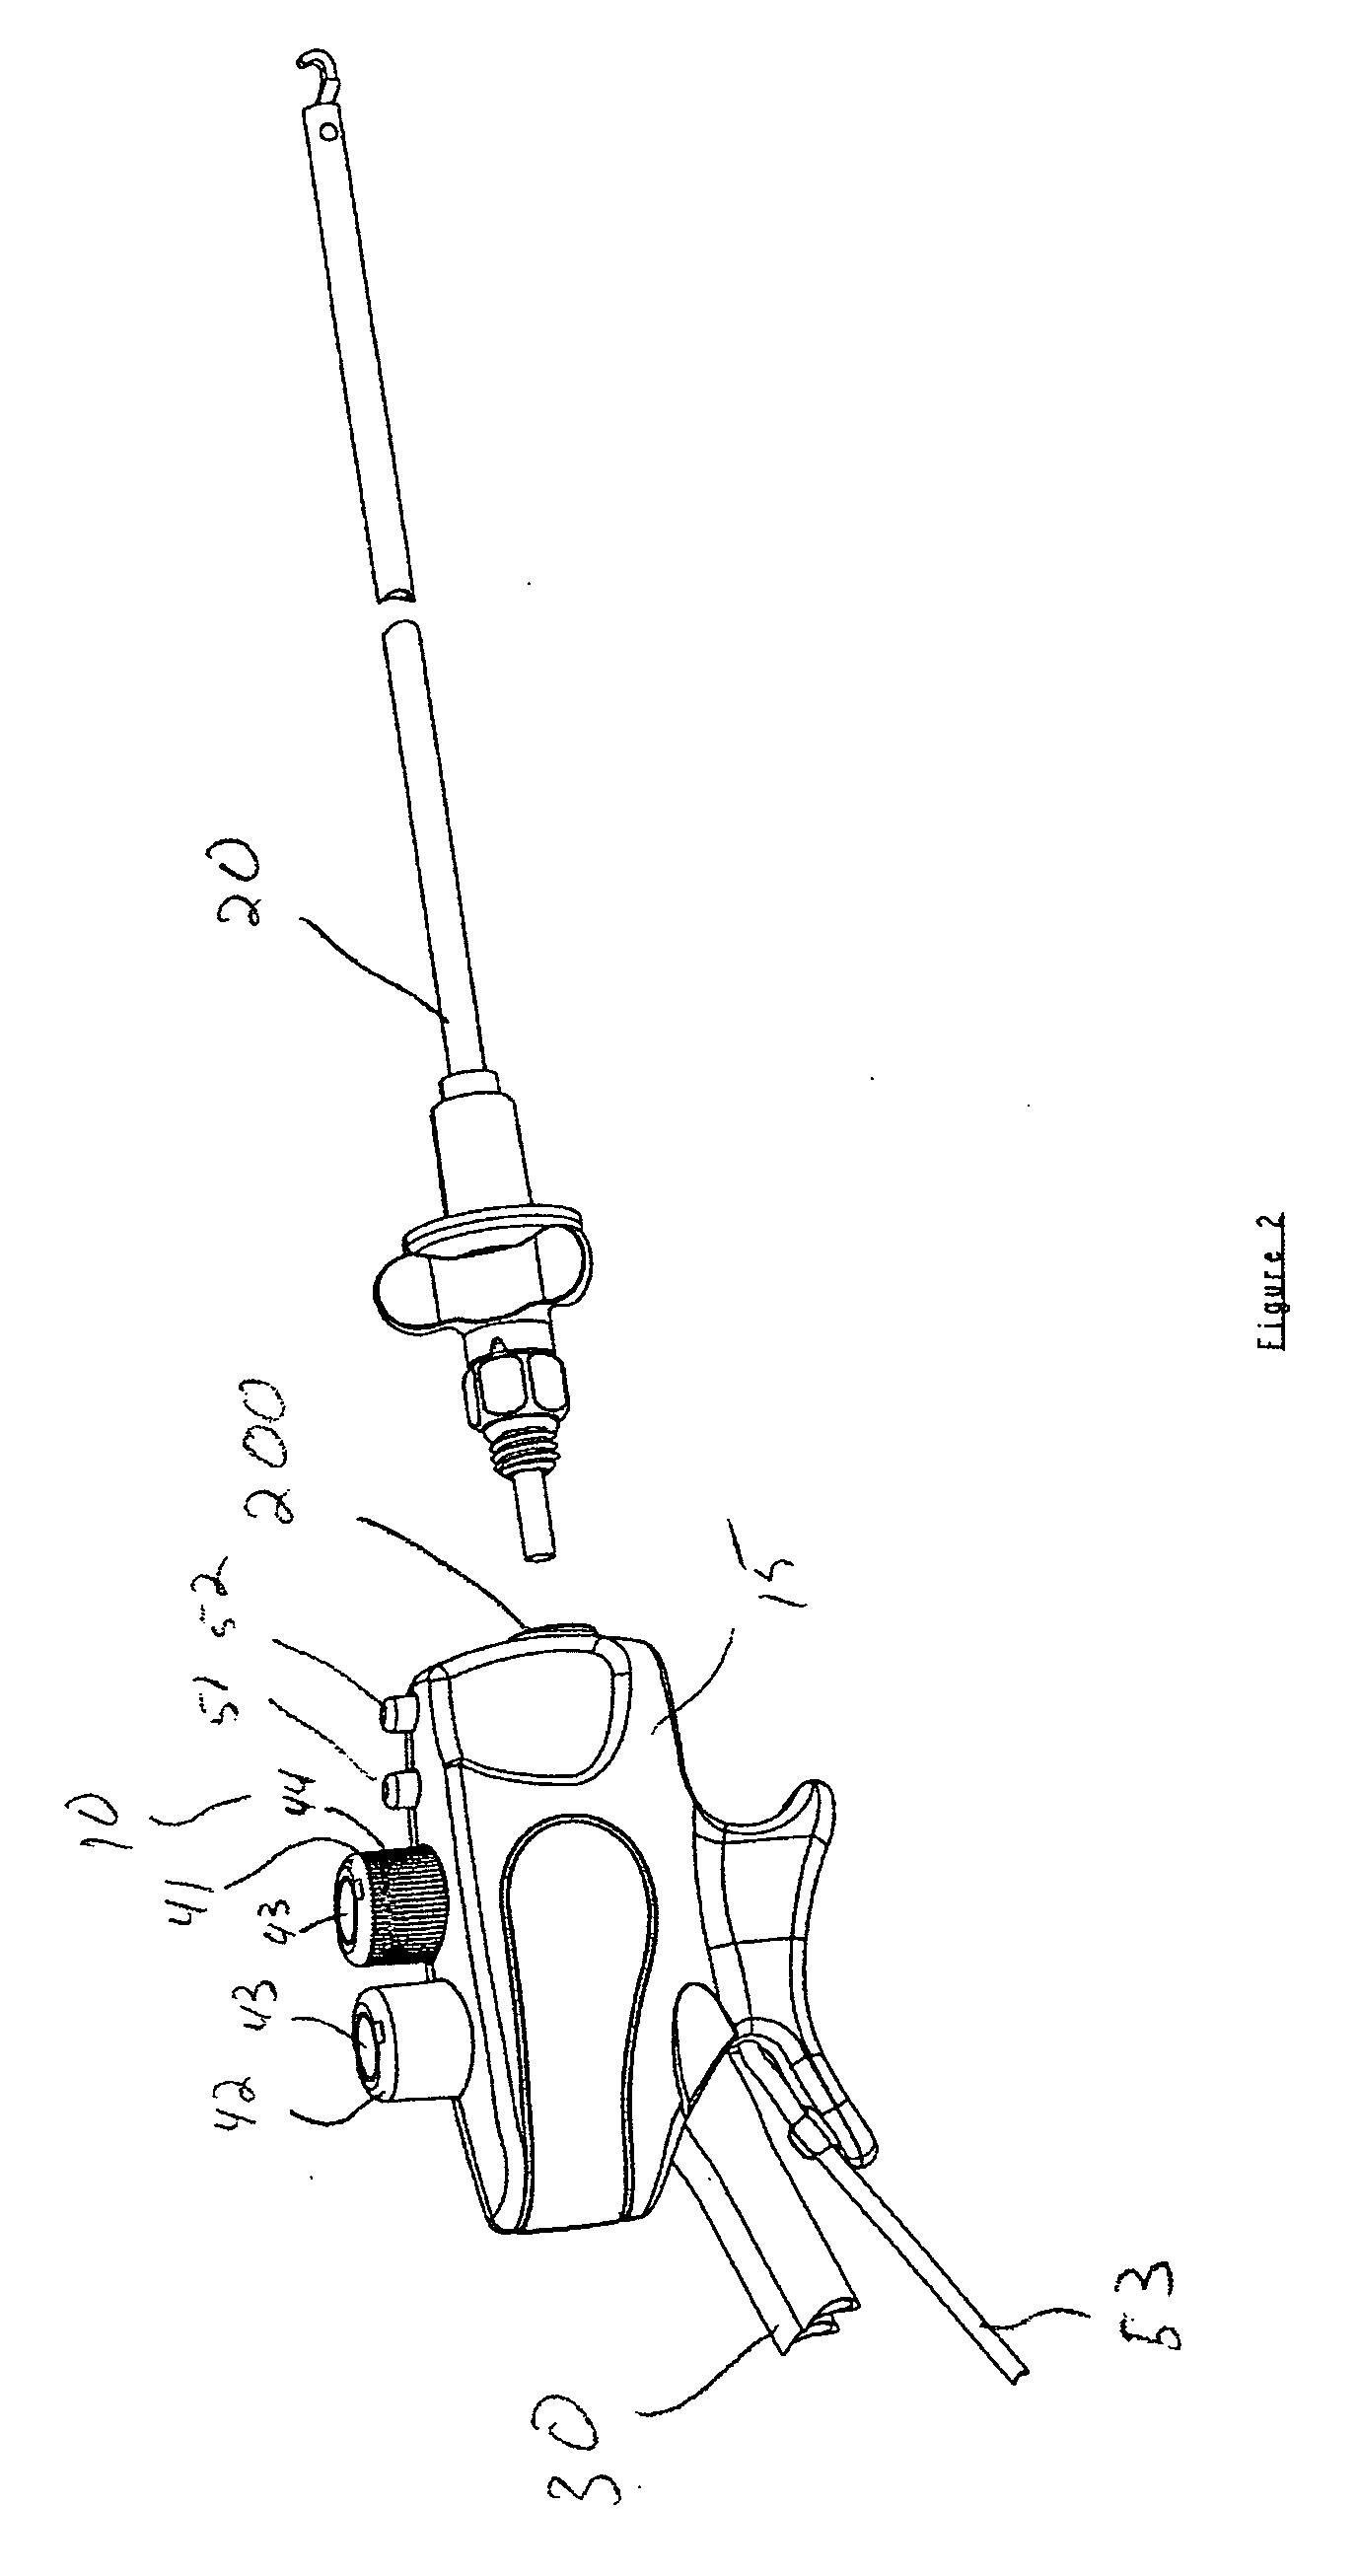 Medical suction and irrigation device